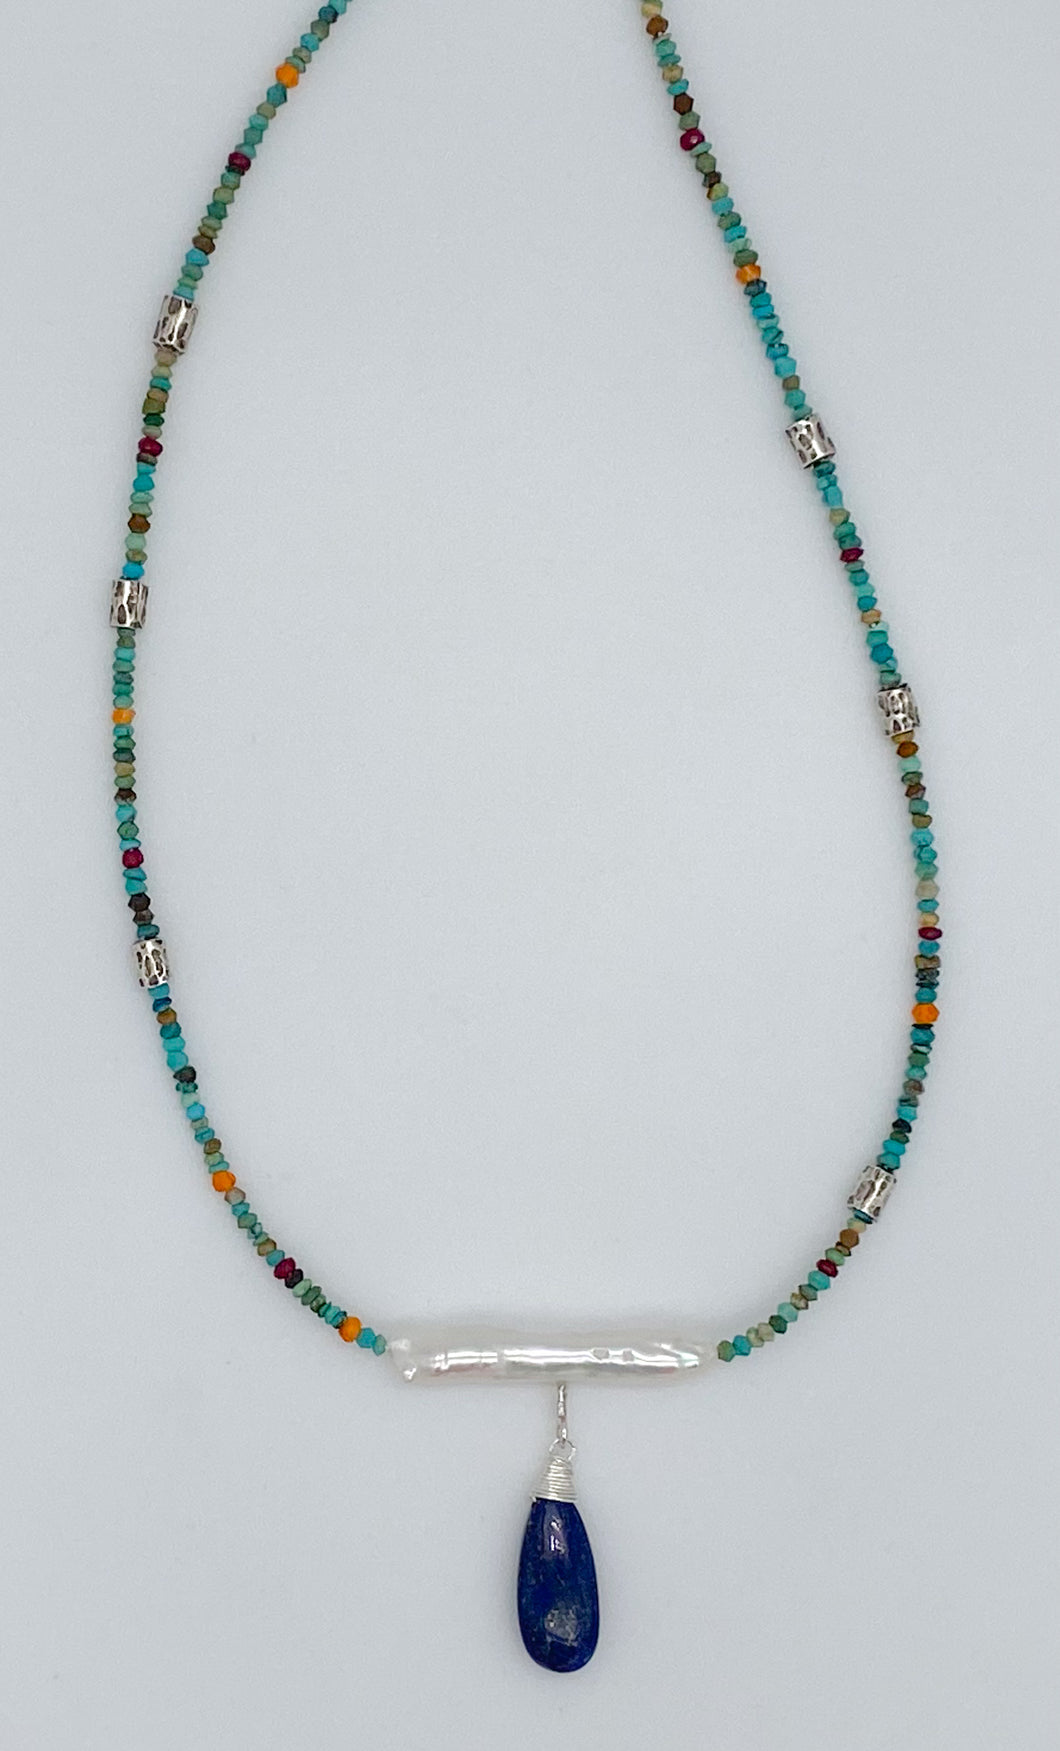 Turquoise ruby, carnelian, pearl,and lapis necklace